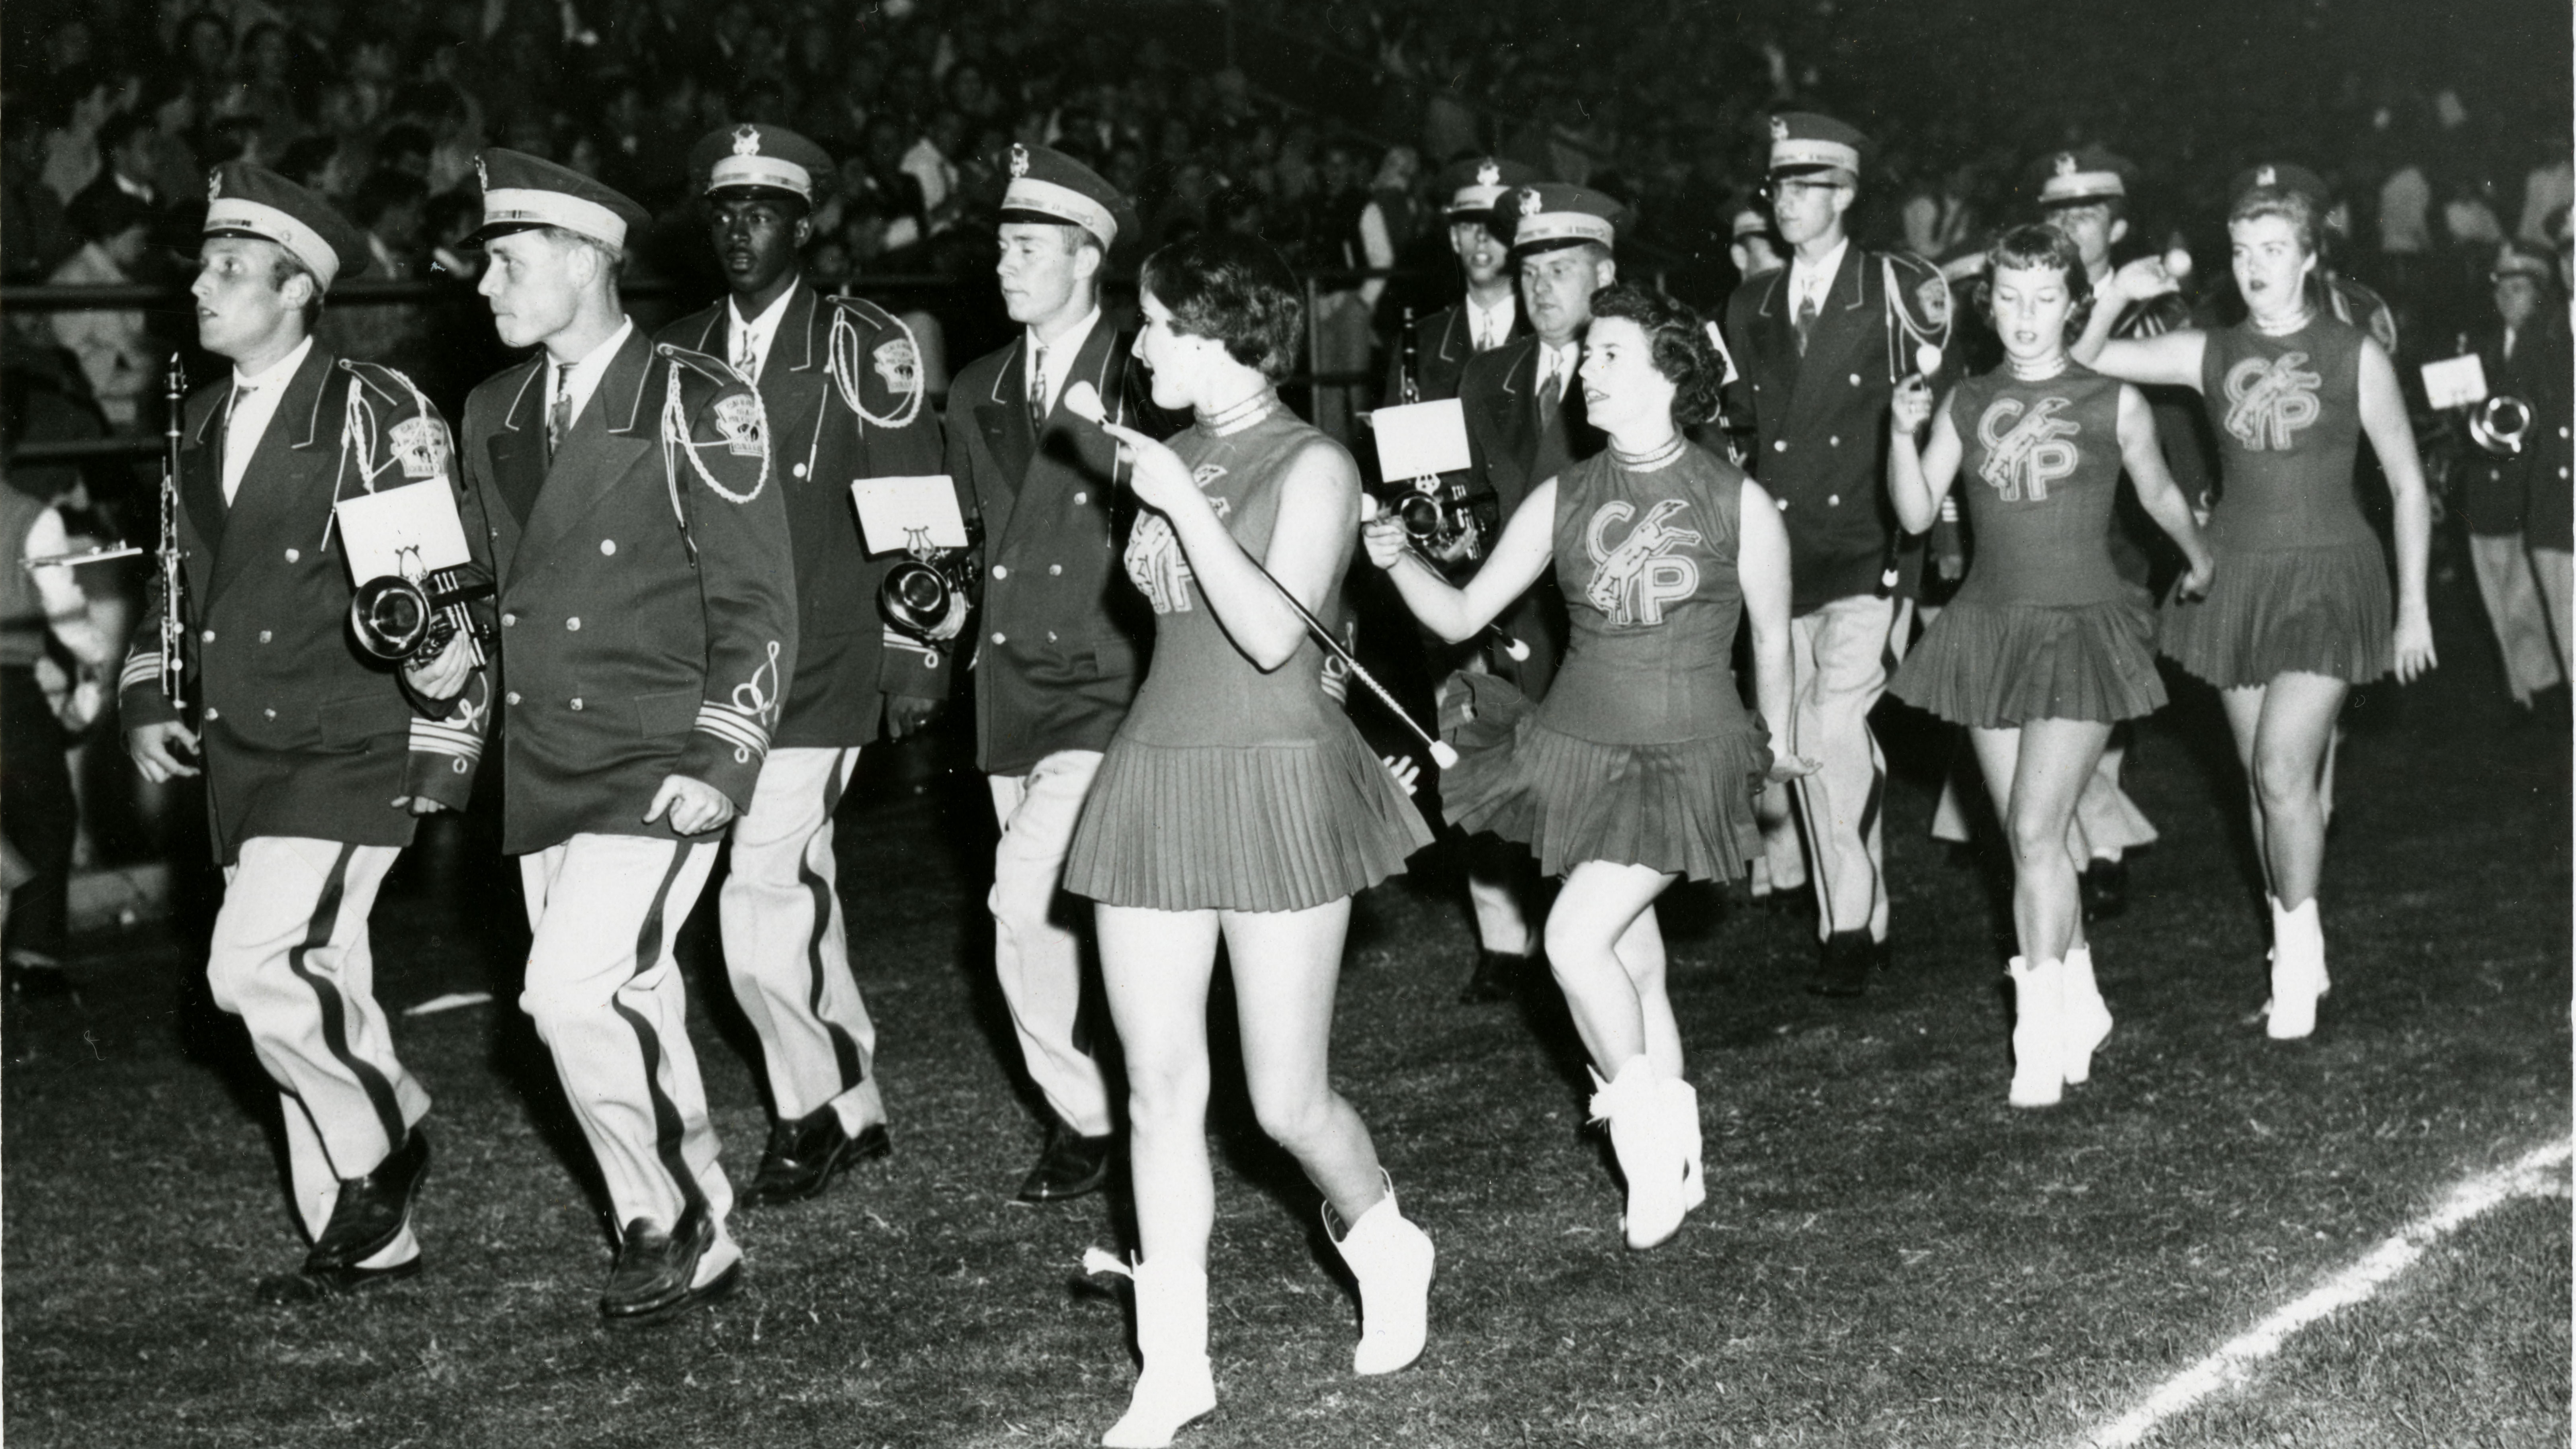 Members of Cal Poly's marching band march alongside female majorettes in a black and white photo